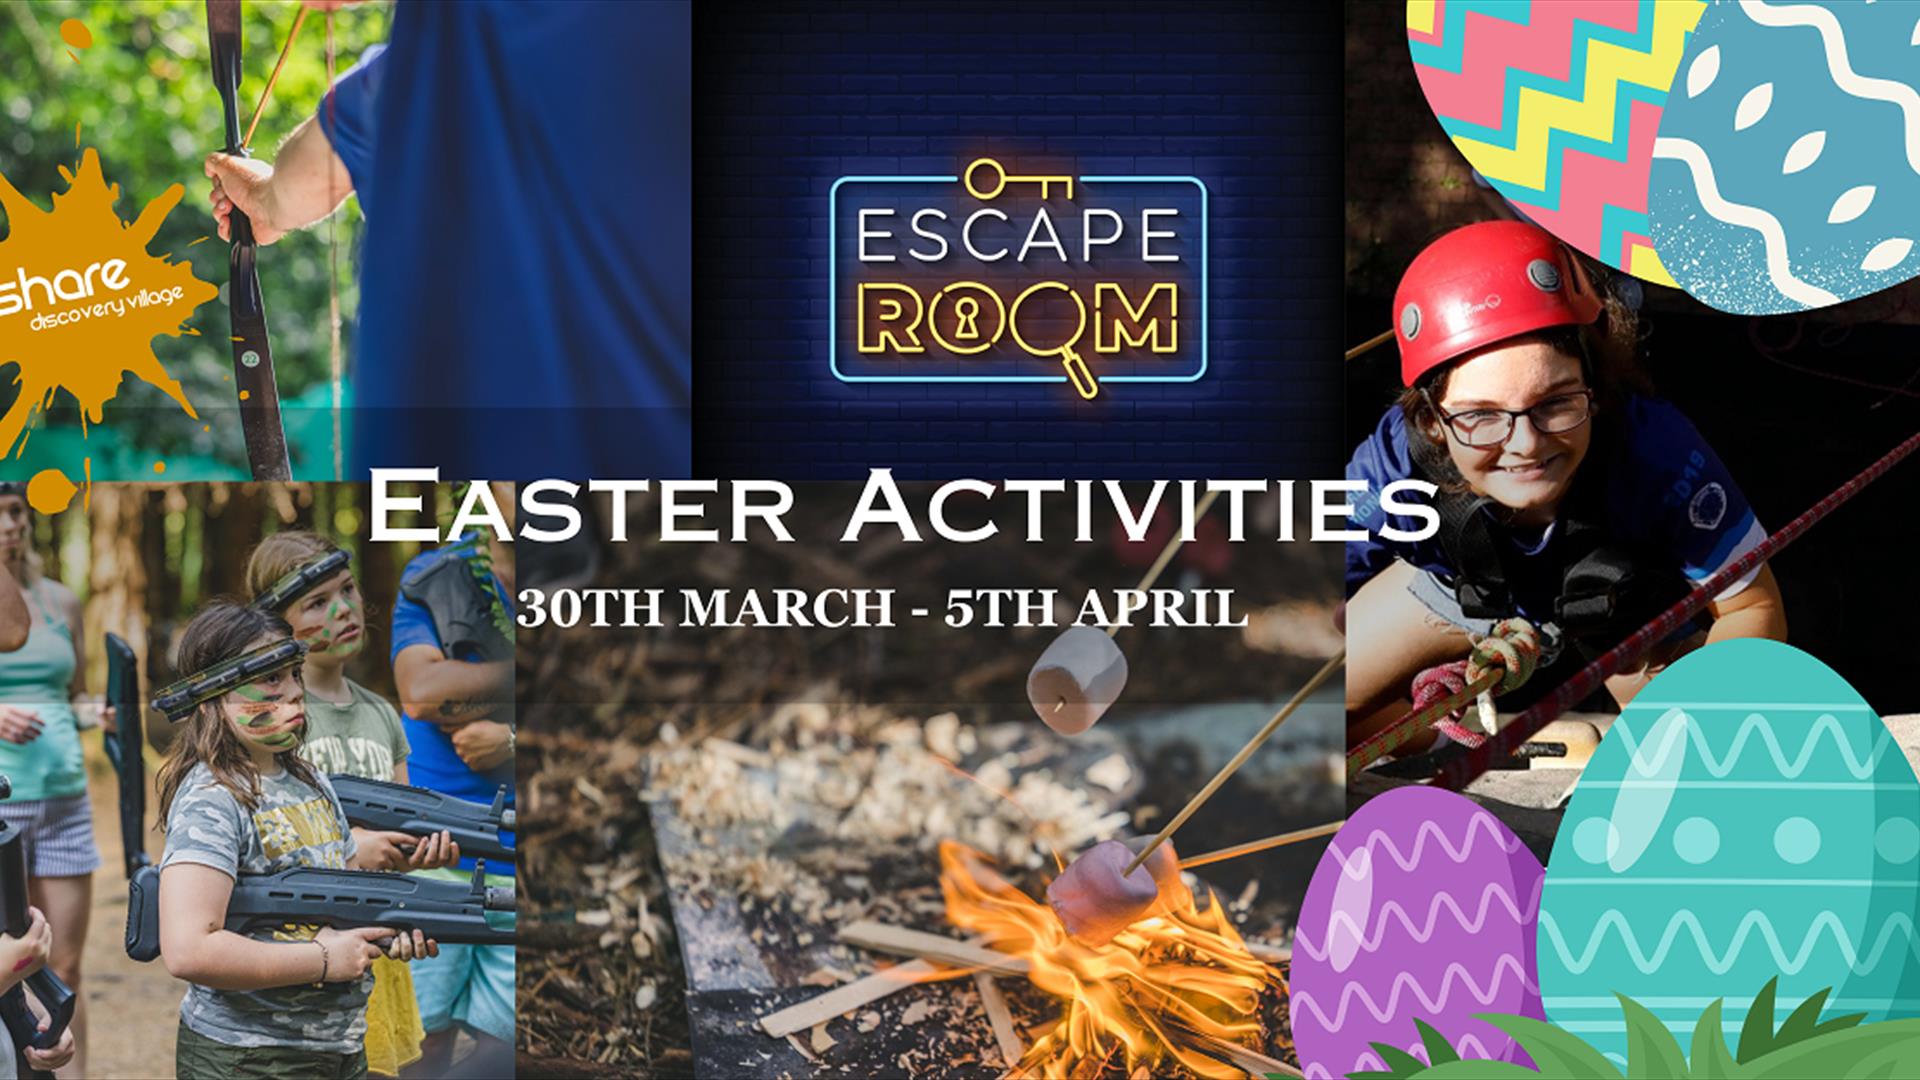 Easter Activities at Share Discovery Village